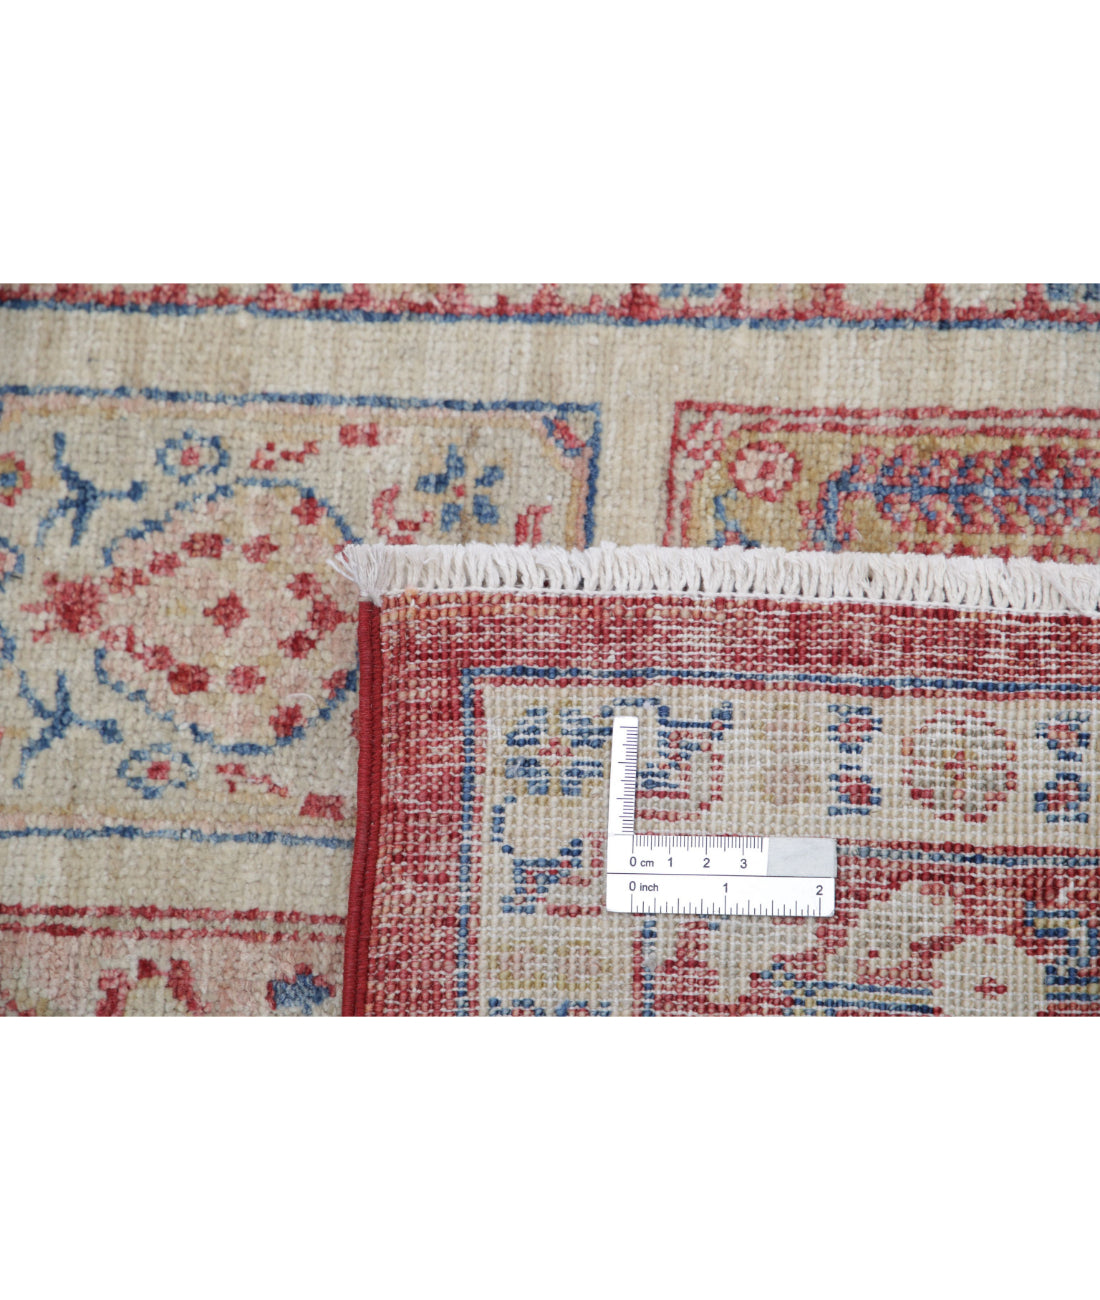 Hand Knotted Bakhtiari Wool Rug - 5'6'' x 7'10'' 5'6'' x 7'10'' (165 X 235) / Multi / Red